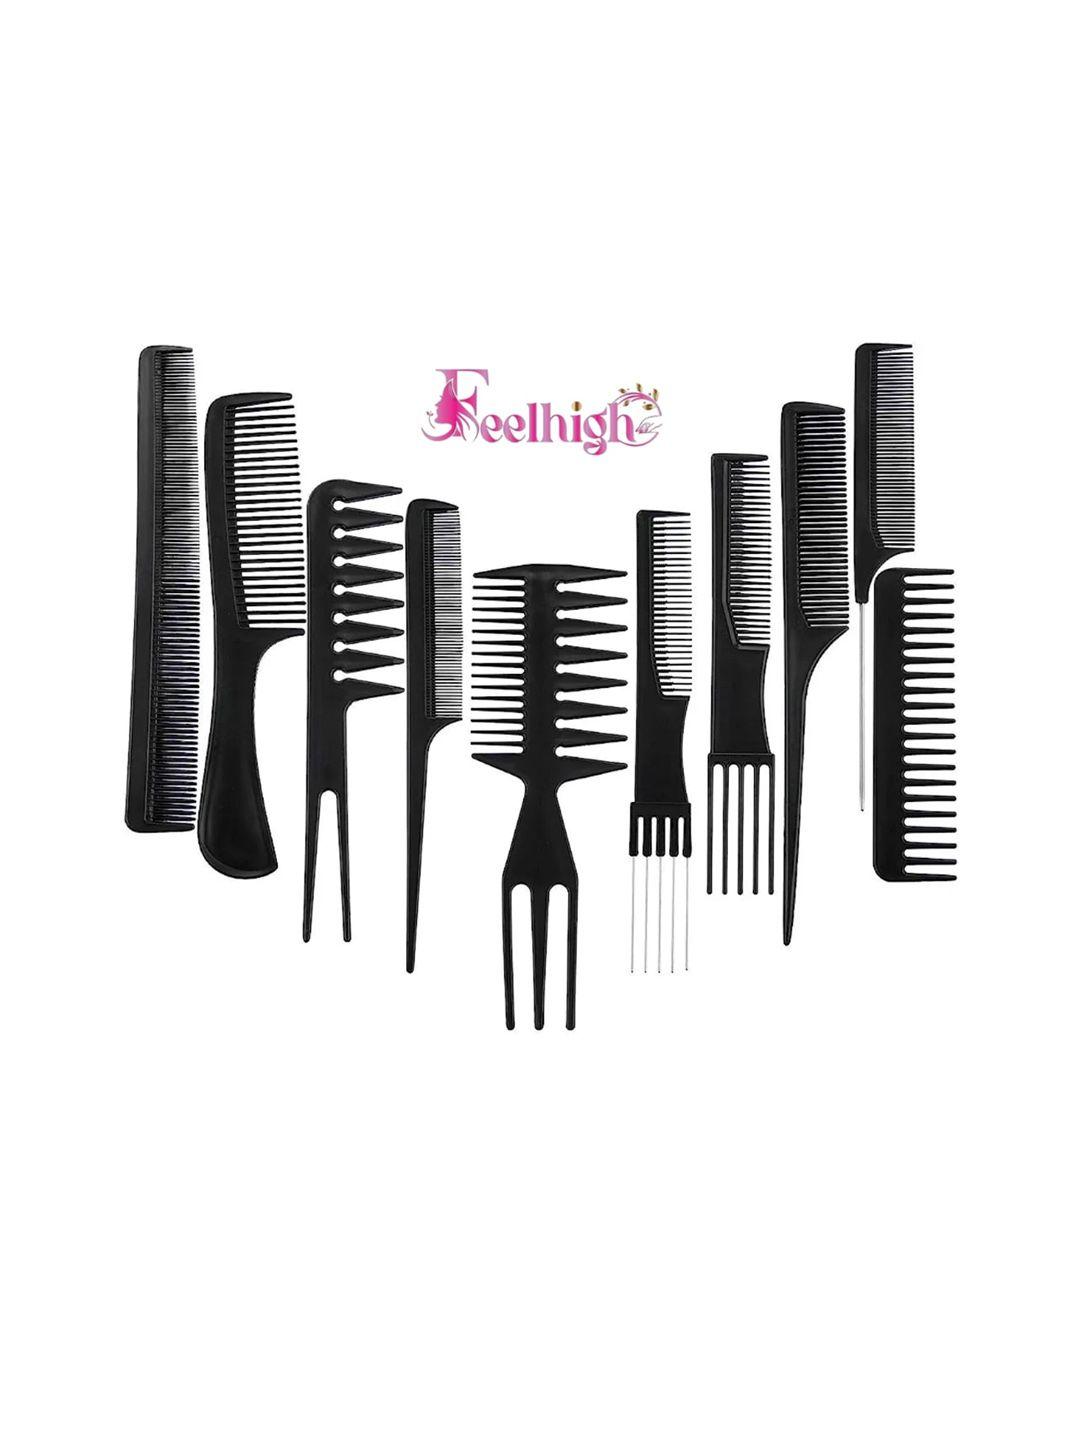 feelhigh set of 10 cut styling hairdressing barbers combs - black